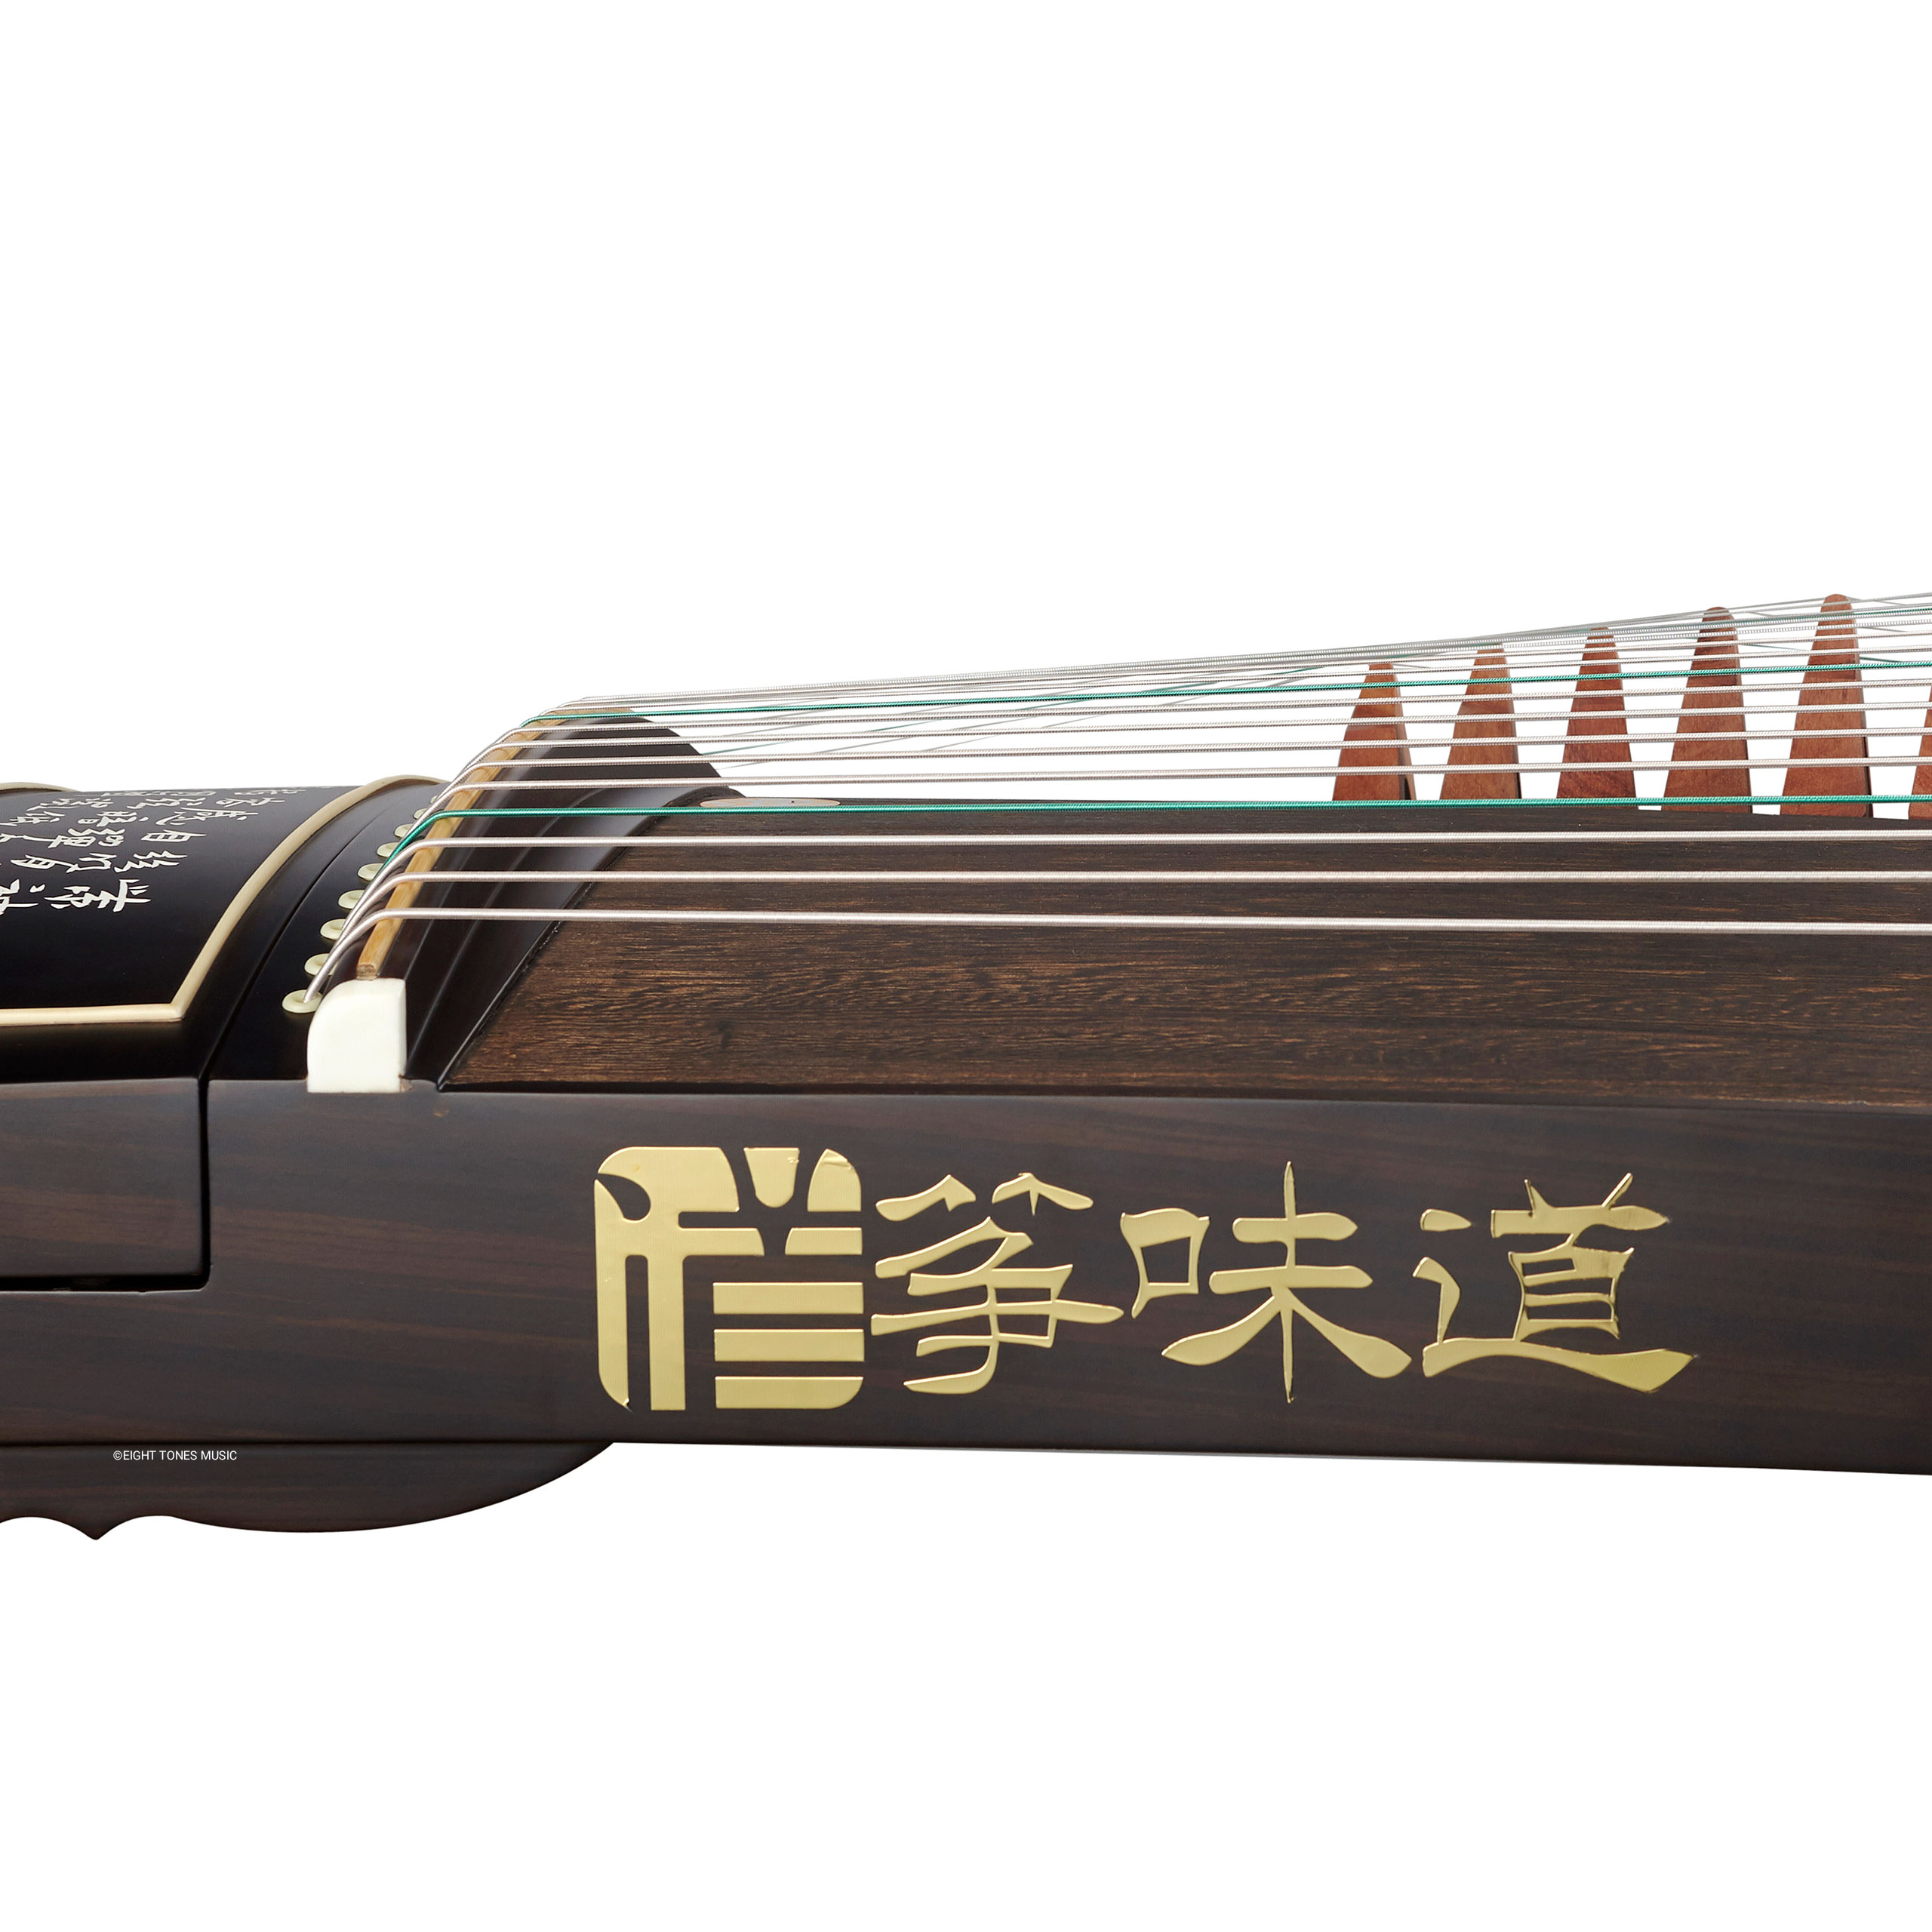 Zhonghao 'Poems In The Evenings' Black Sandalwood Guzheng Sideboard with brand